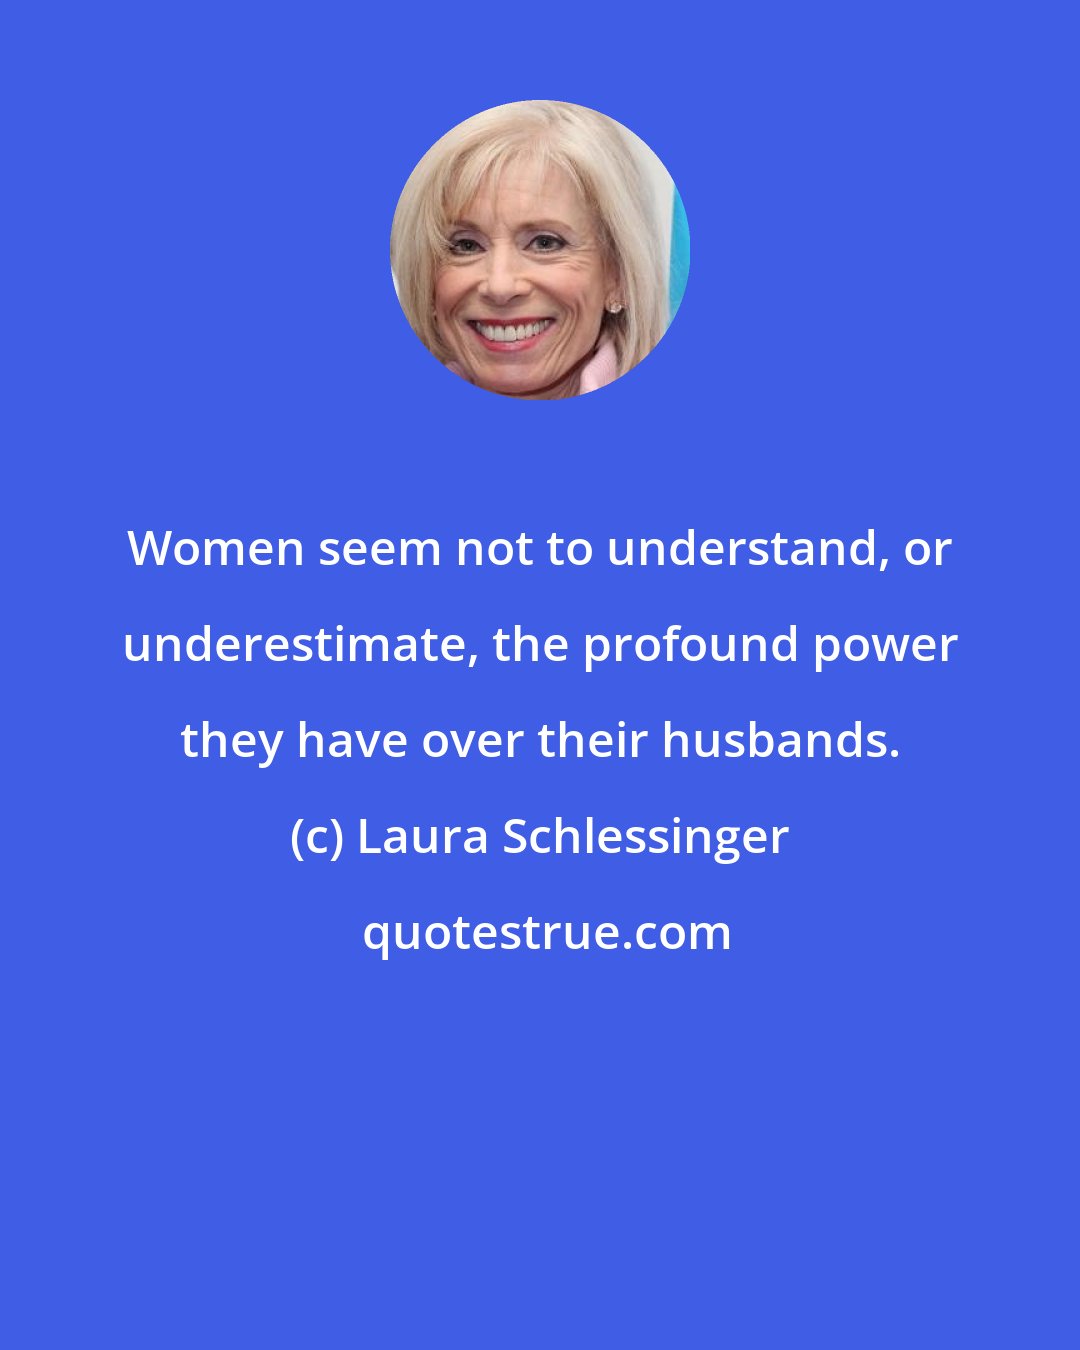 Laura Schlessinger: Women seem not to understand, or underestimate, the profound power they have over their husbands.